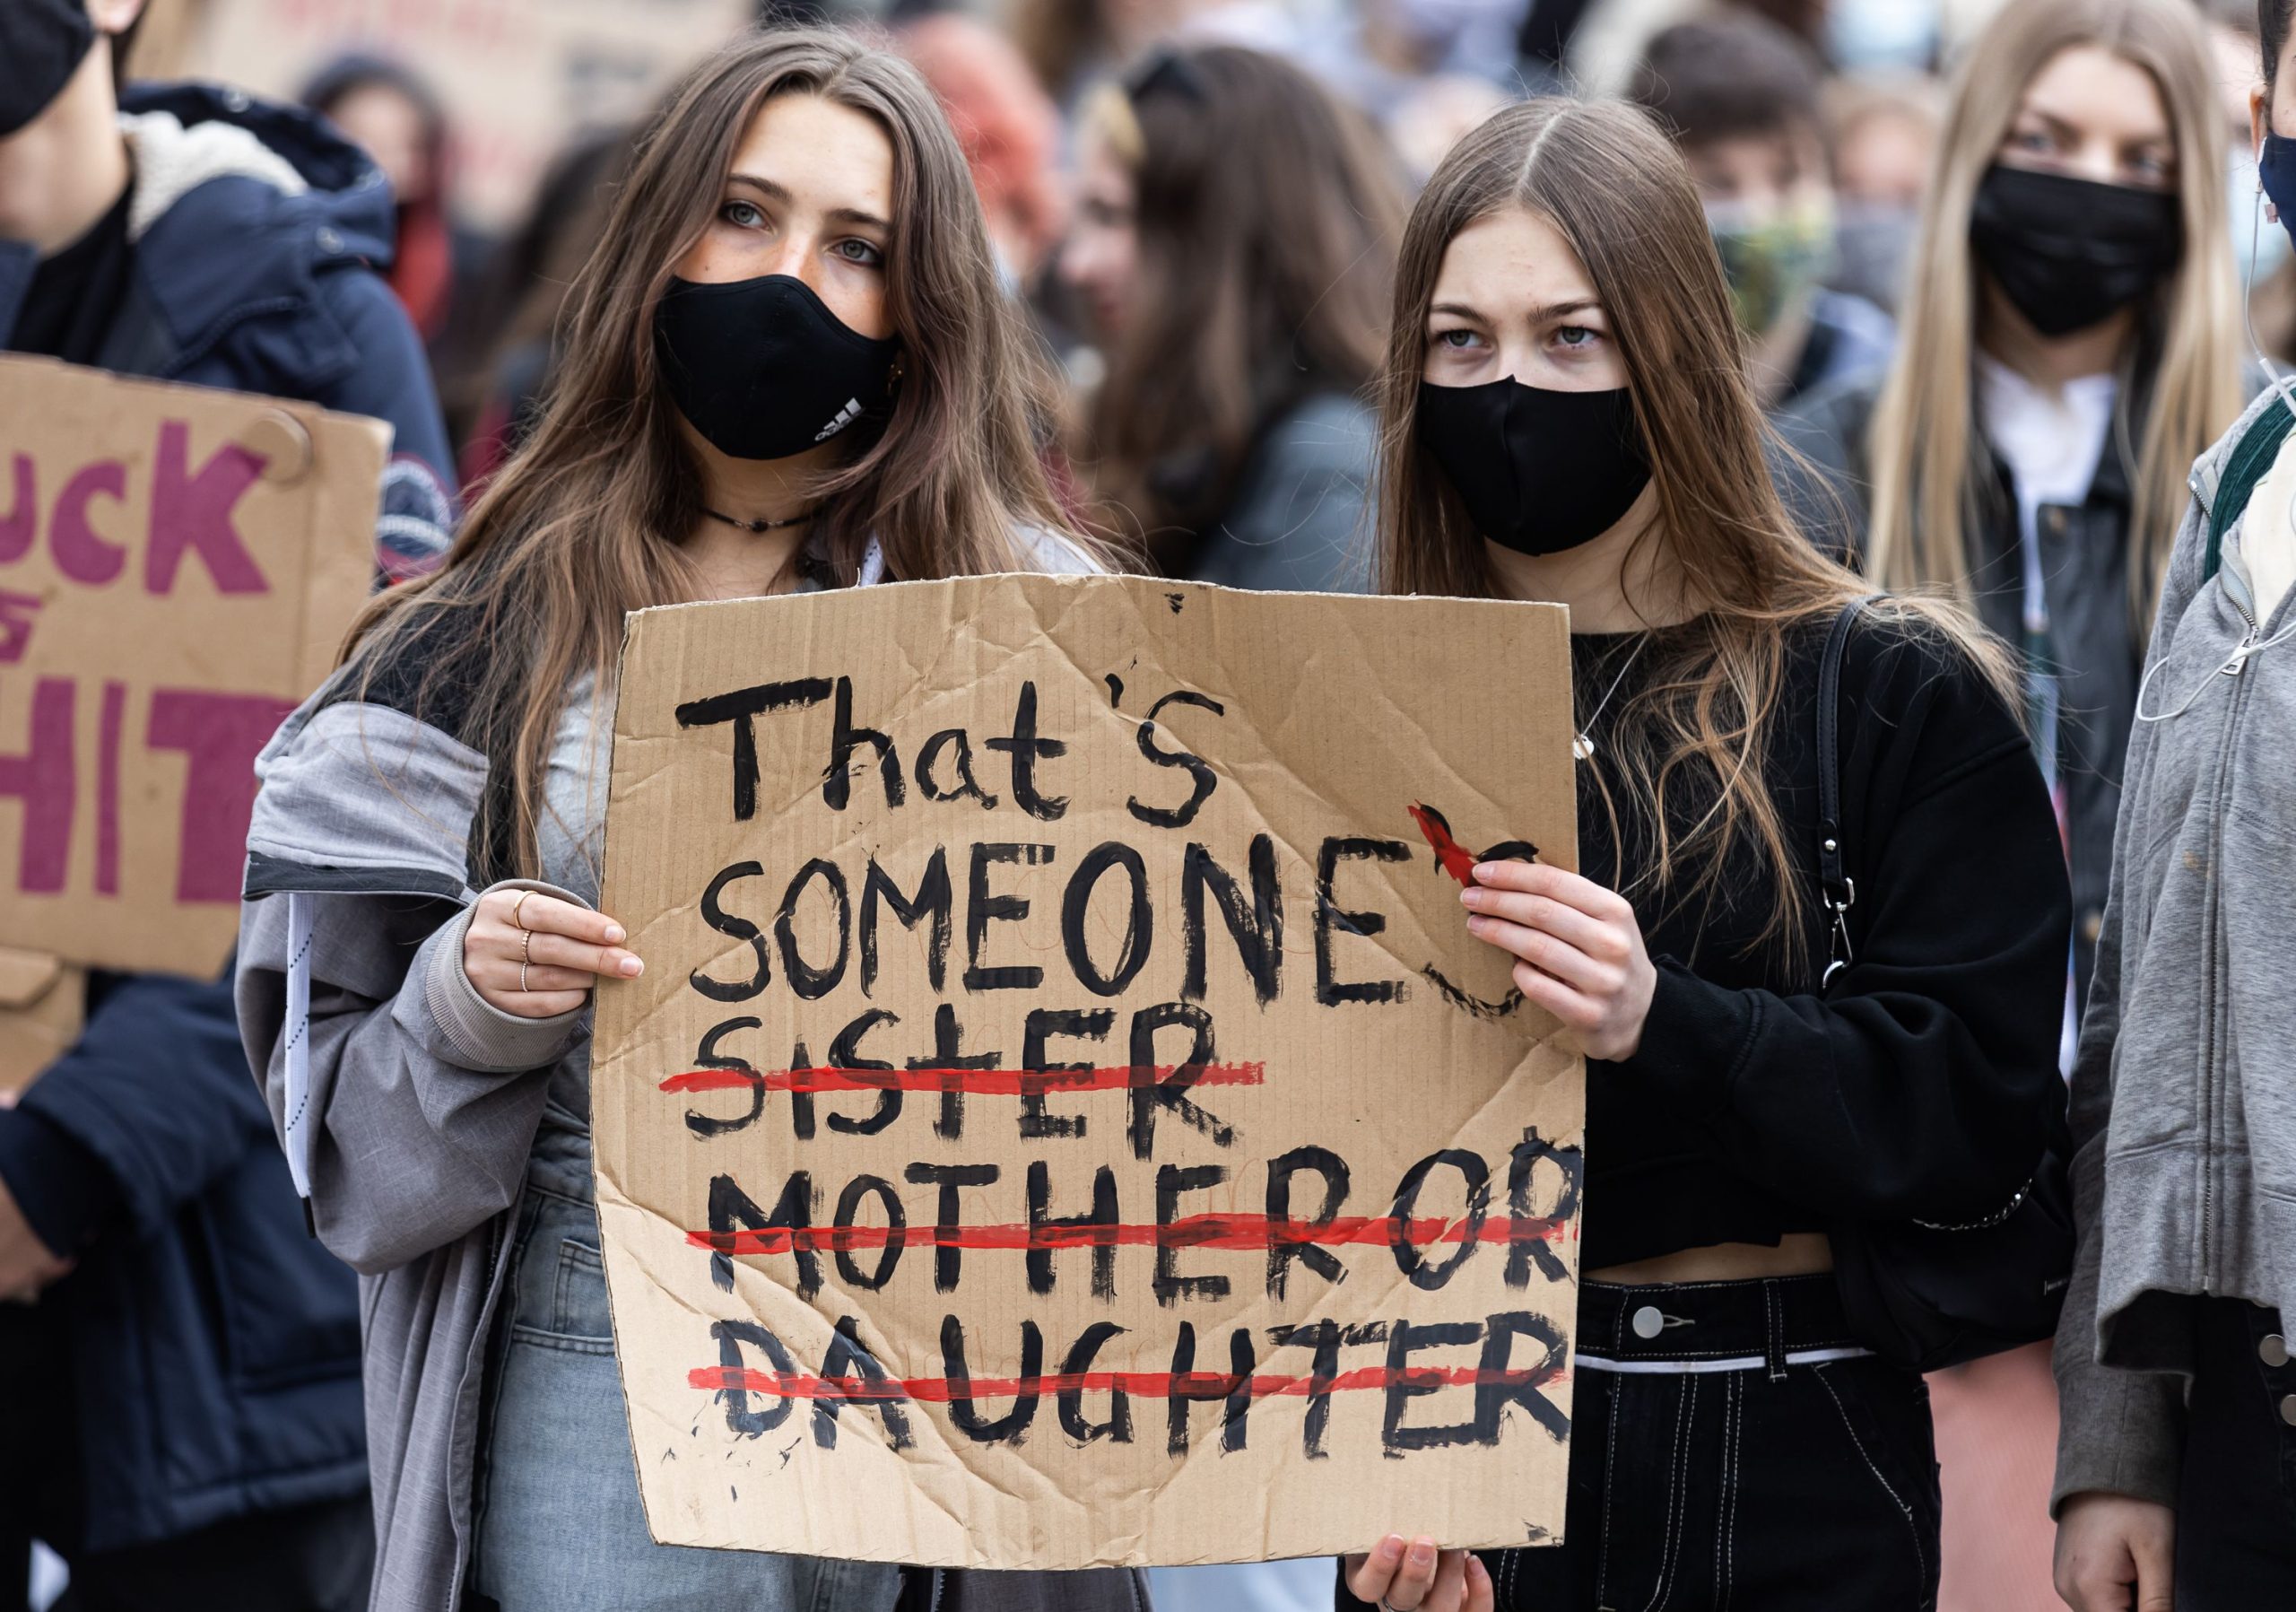 Protest sign reading "That's someone's sister, mother, daughter"